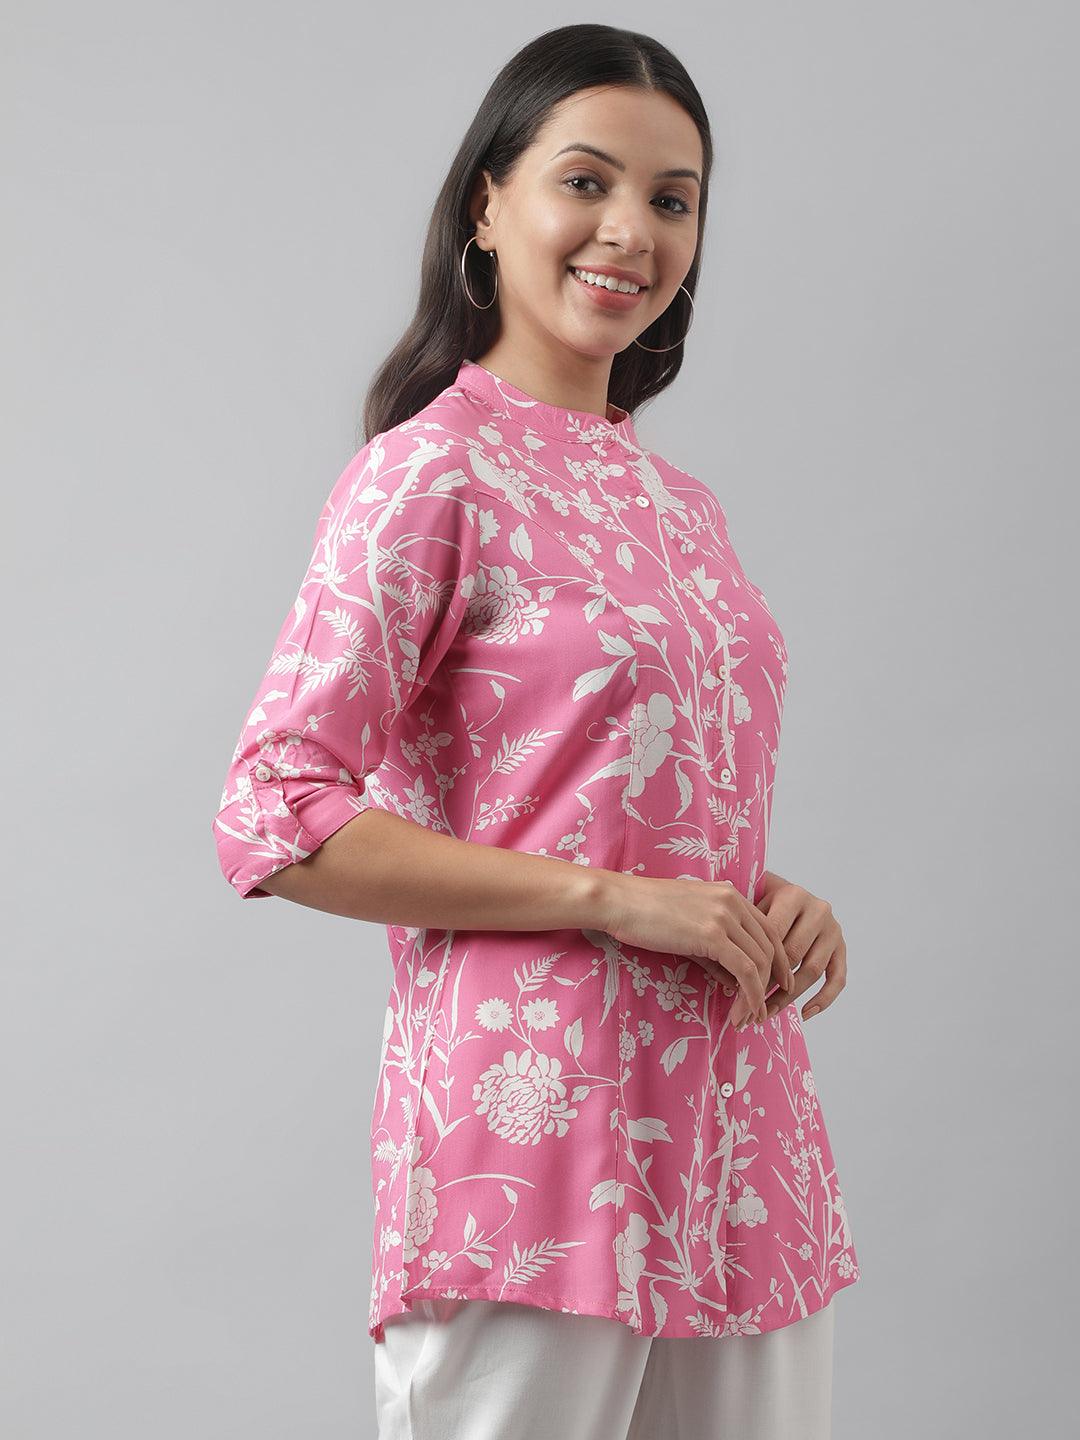 Divena Light Pink Floral Printed Rayon A-line Shirt Style Top - divena world